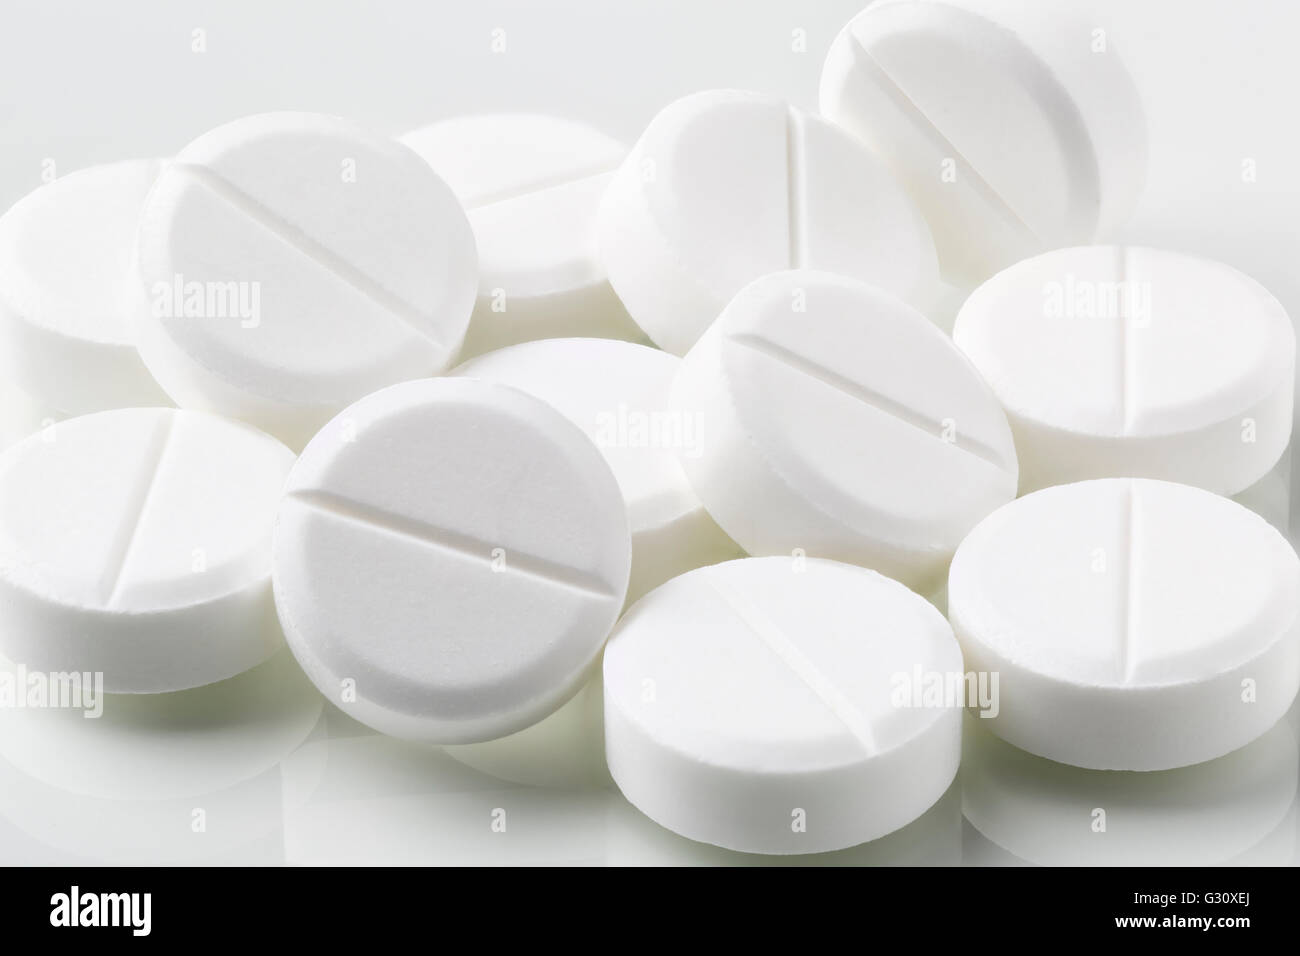 Bunch of white round pills and drugs on white background Stock Photo